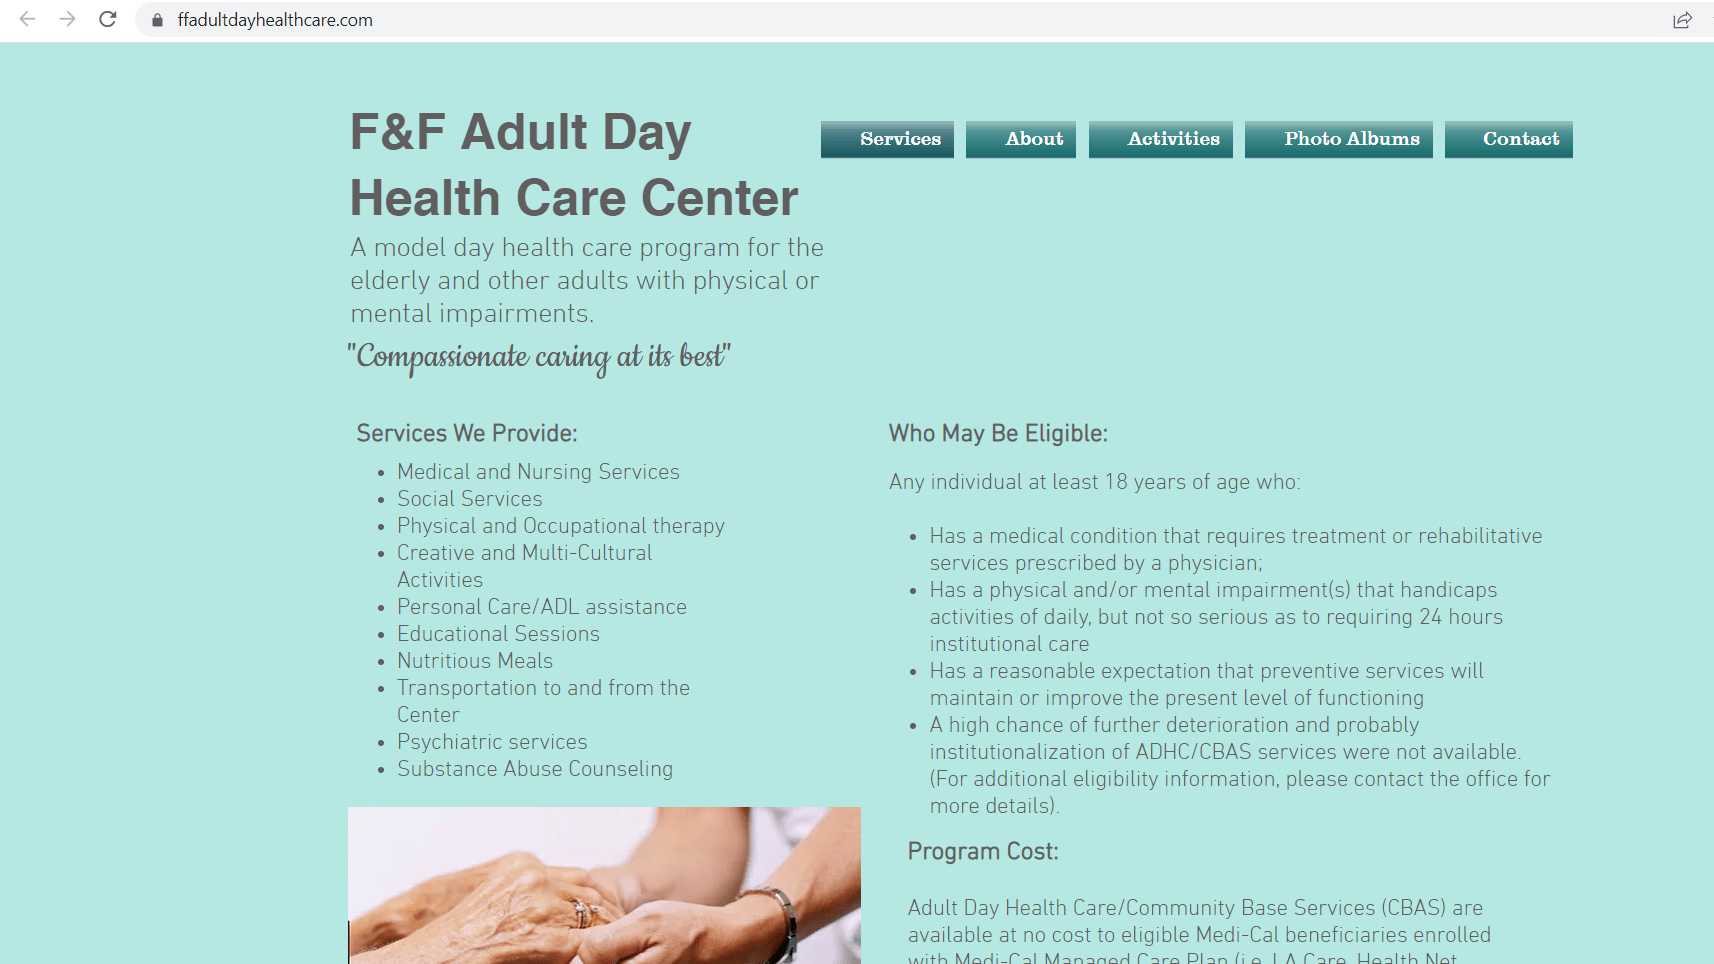 F&F Adult Day Healthcare Center (Long Beach, CA)